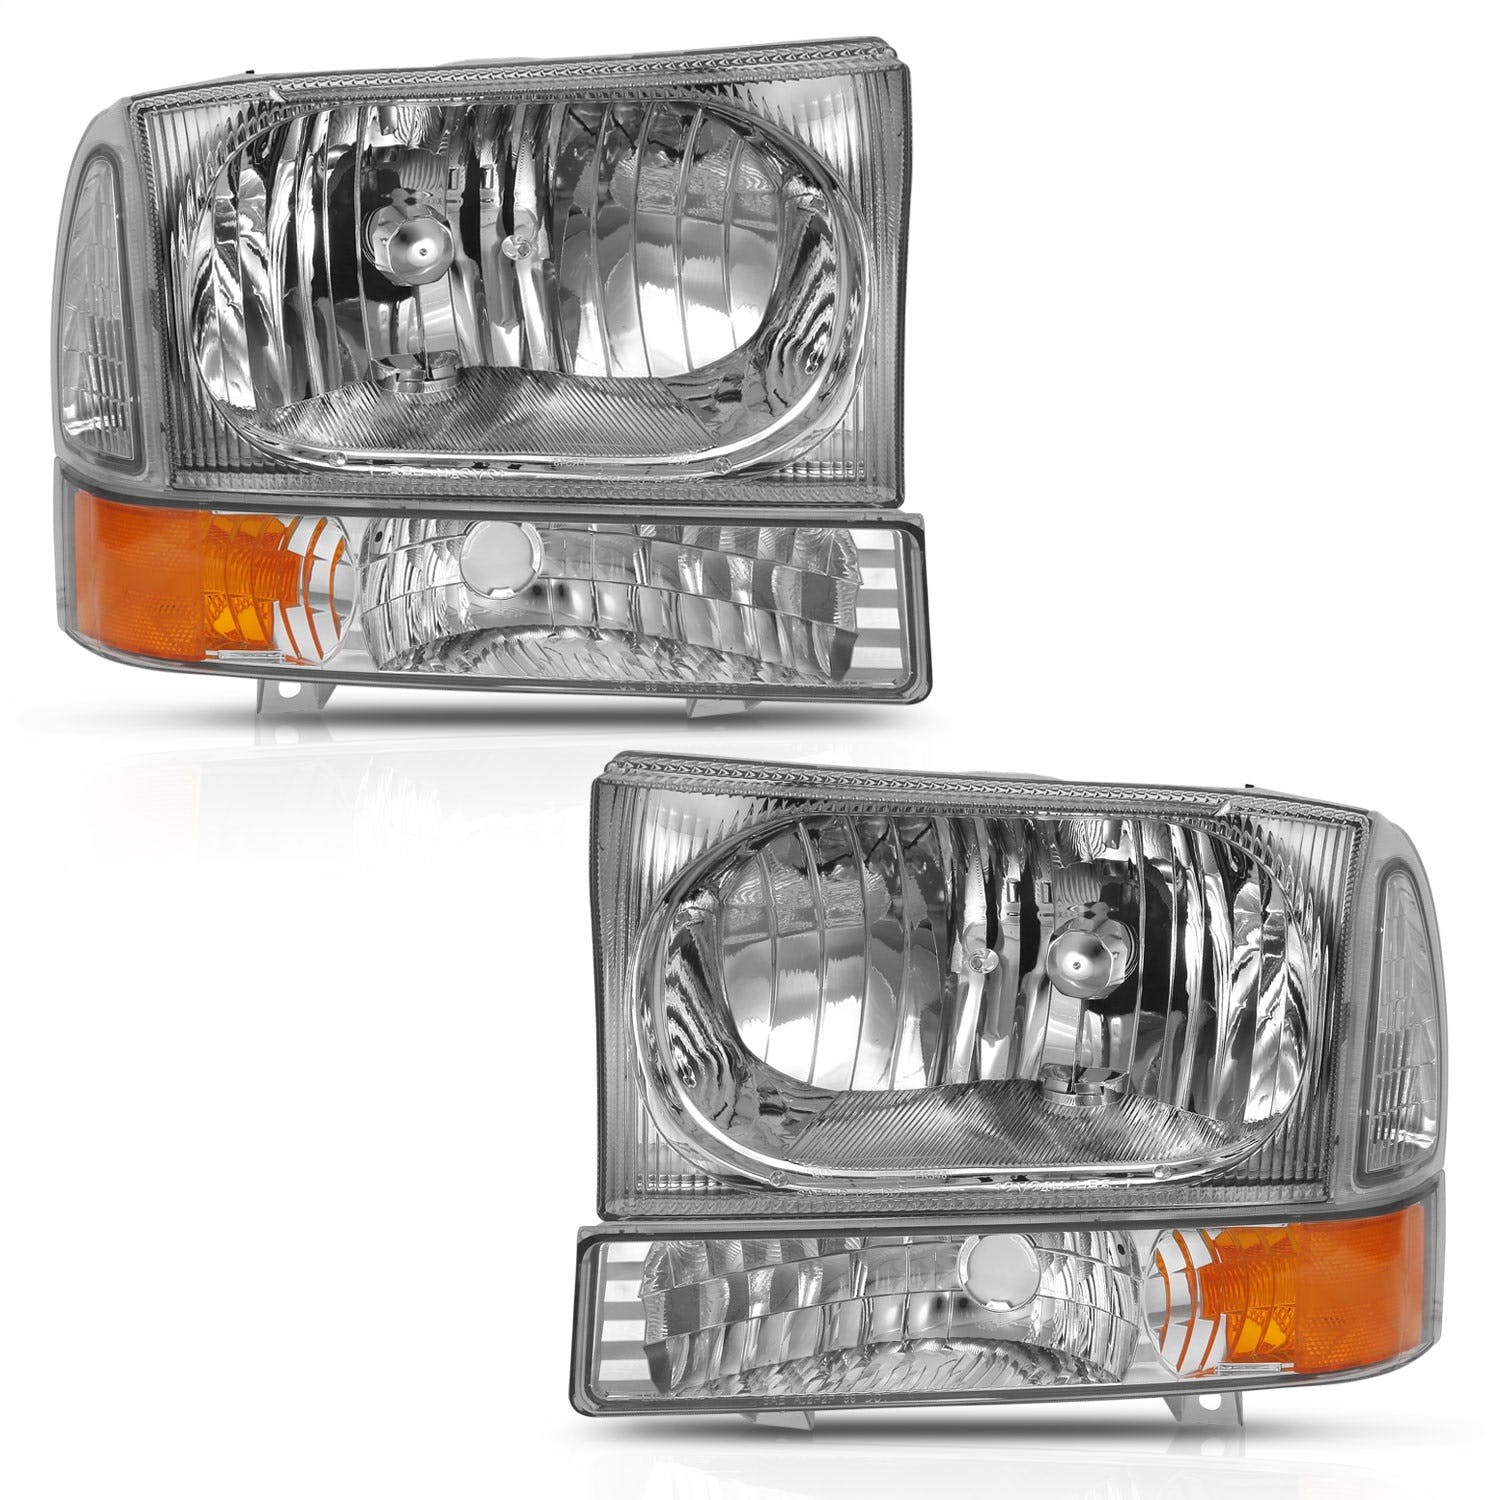 AnzoUSA 111458 Crystal Headlight with Corner Light Chrome Amber (with out Bulb)